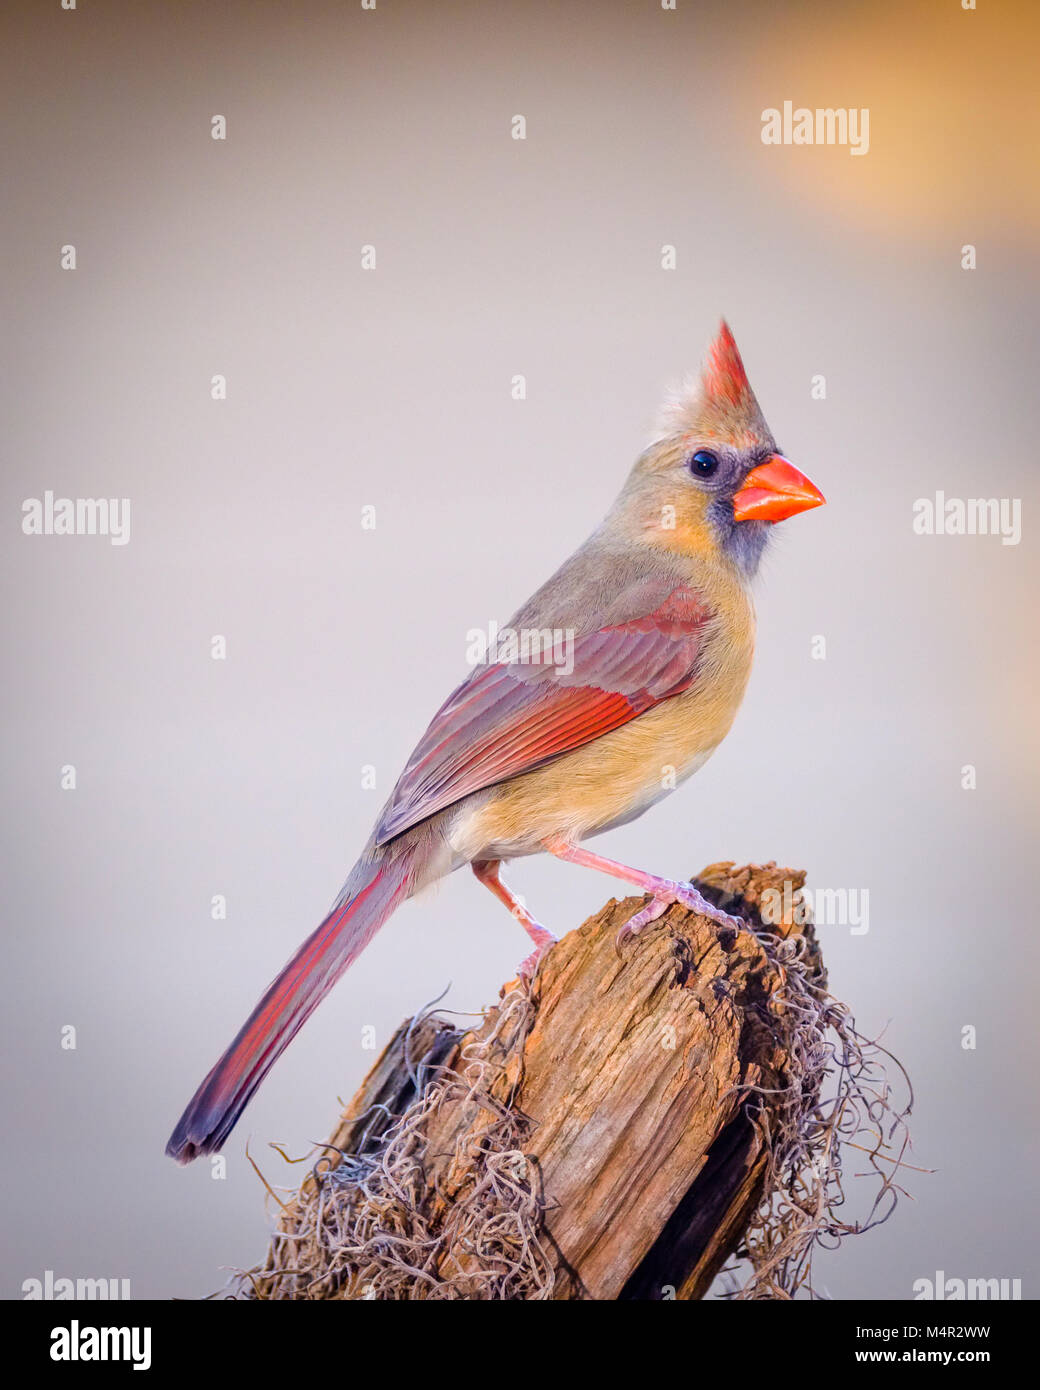 Female Northern Cardinal Cardinalis cardinalis wild songbird perched on tree stump and commonly called a redbird Stock Photo